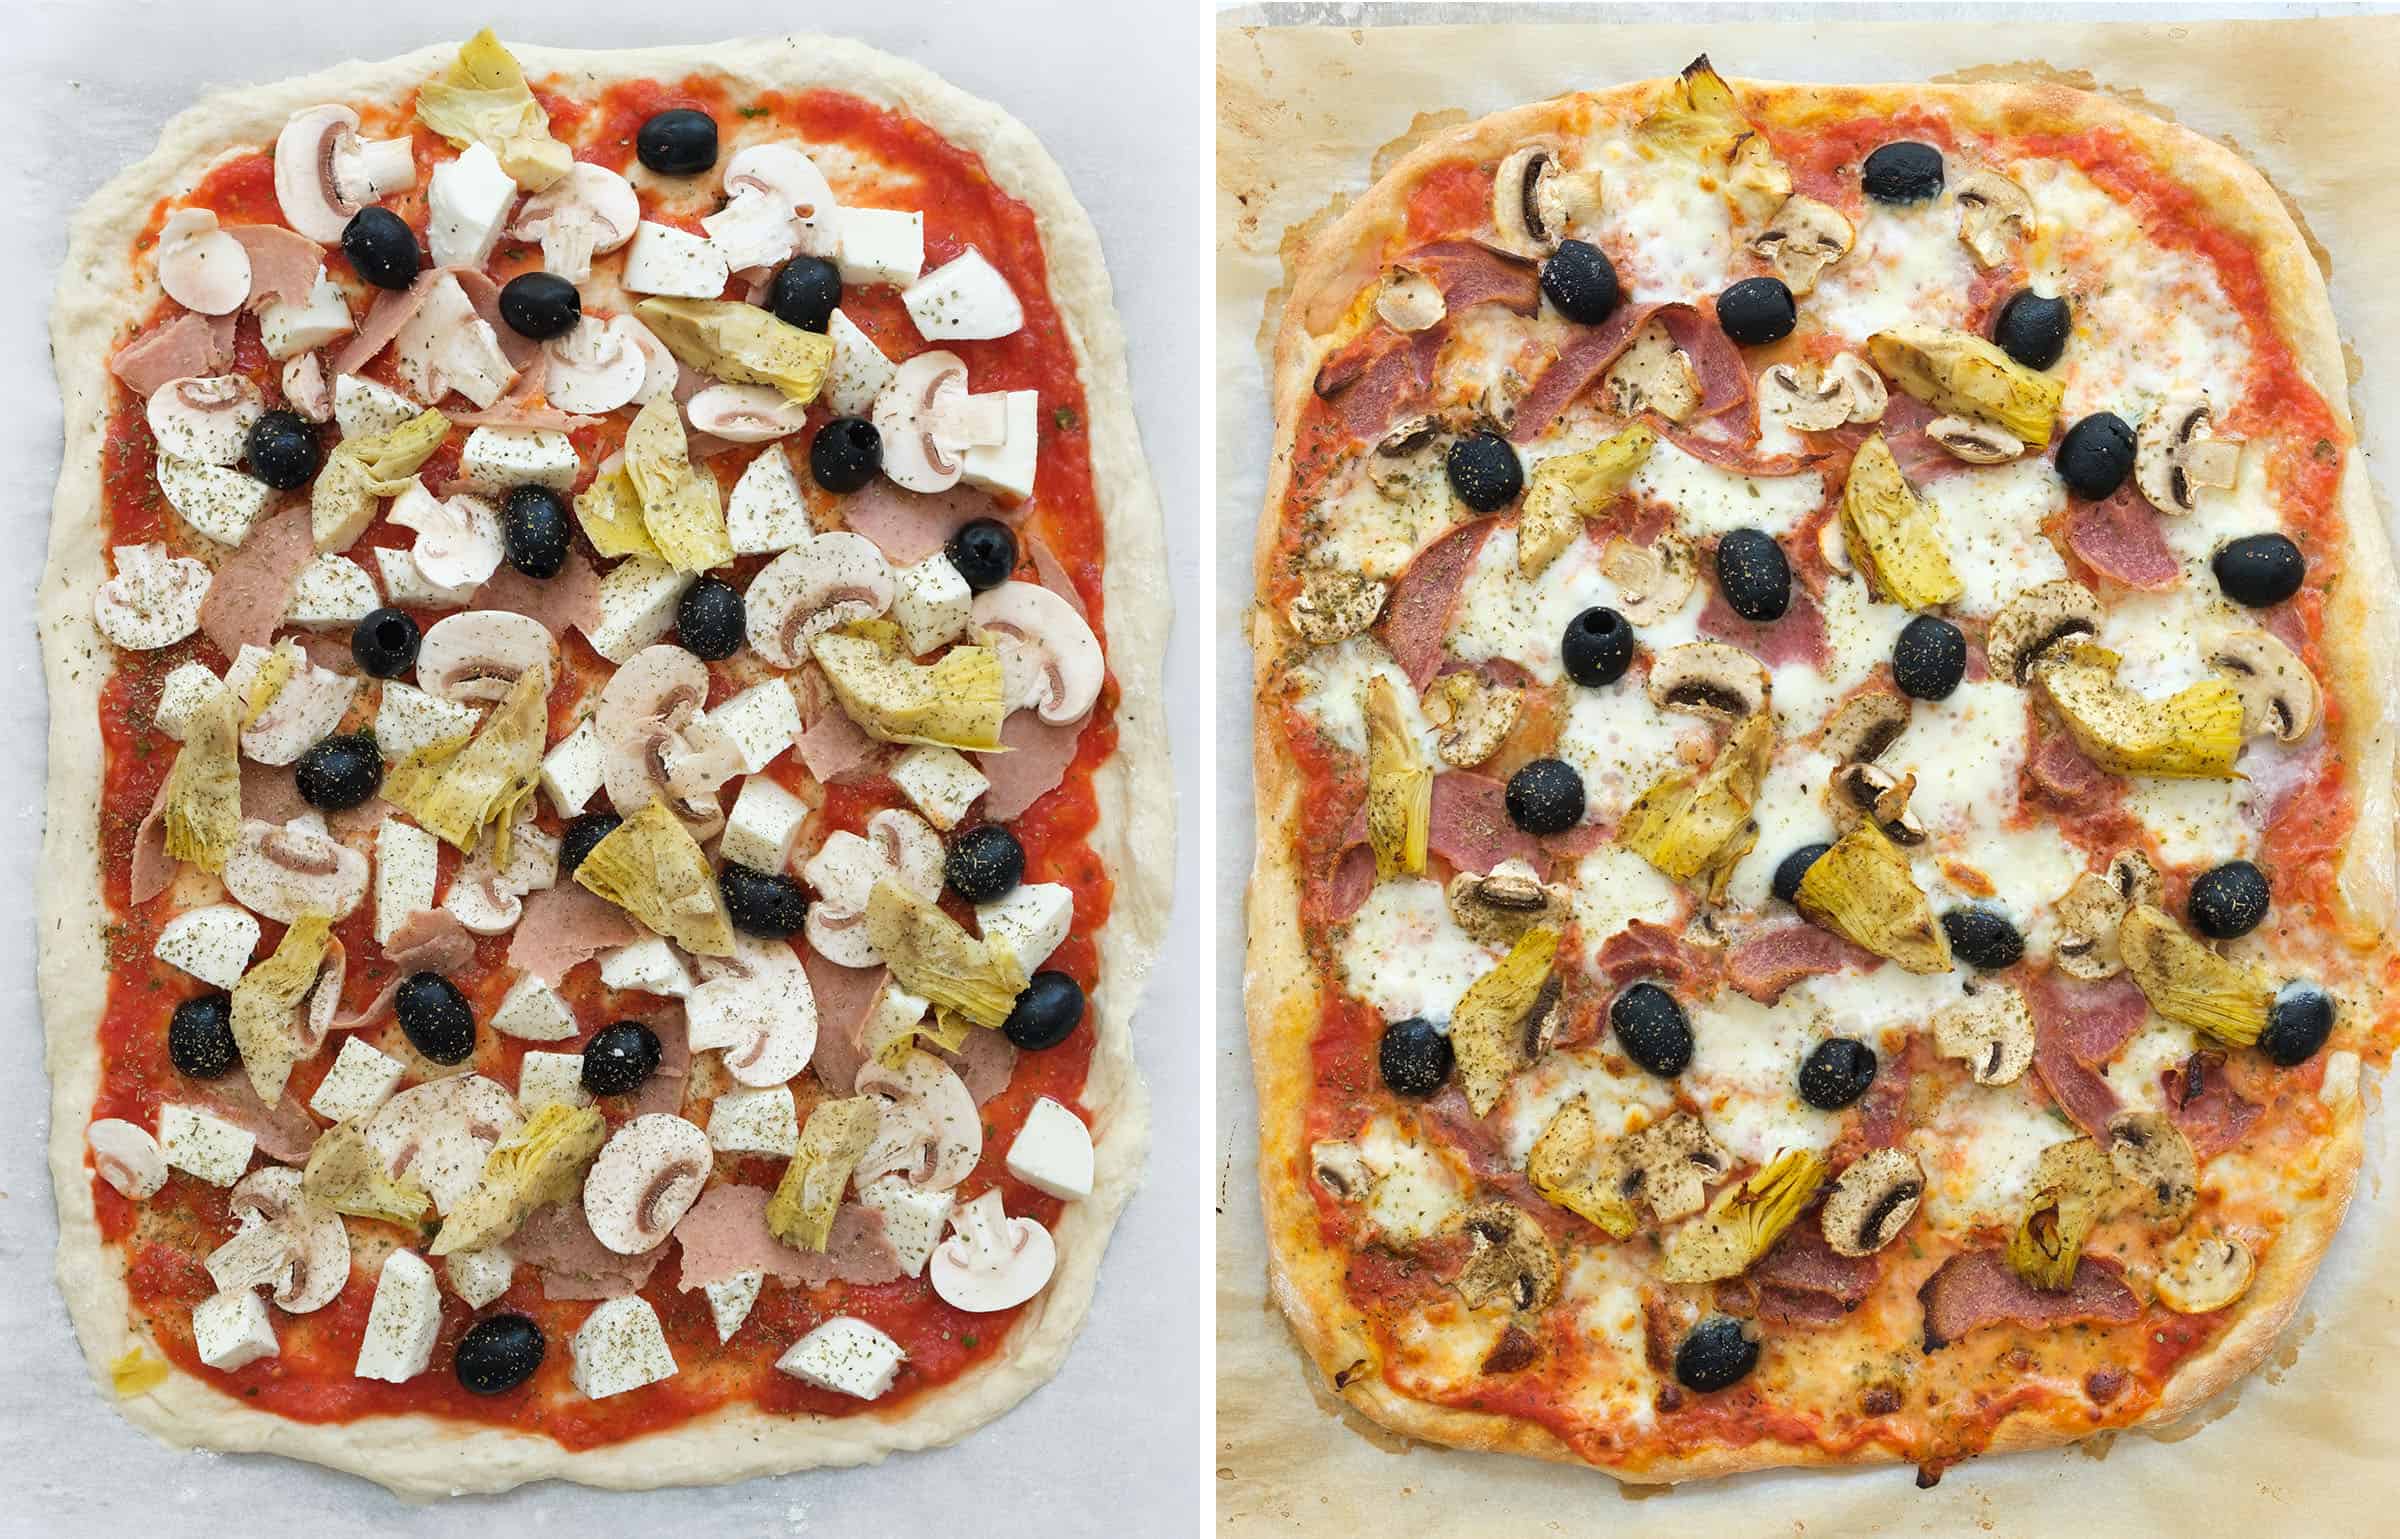 Top view of a large capricciosa pizza before and after baking.